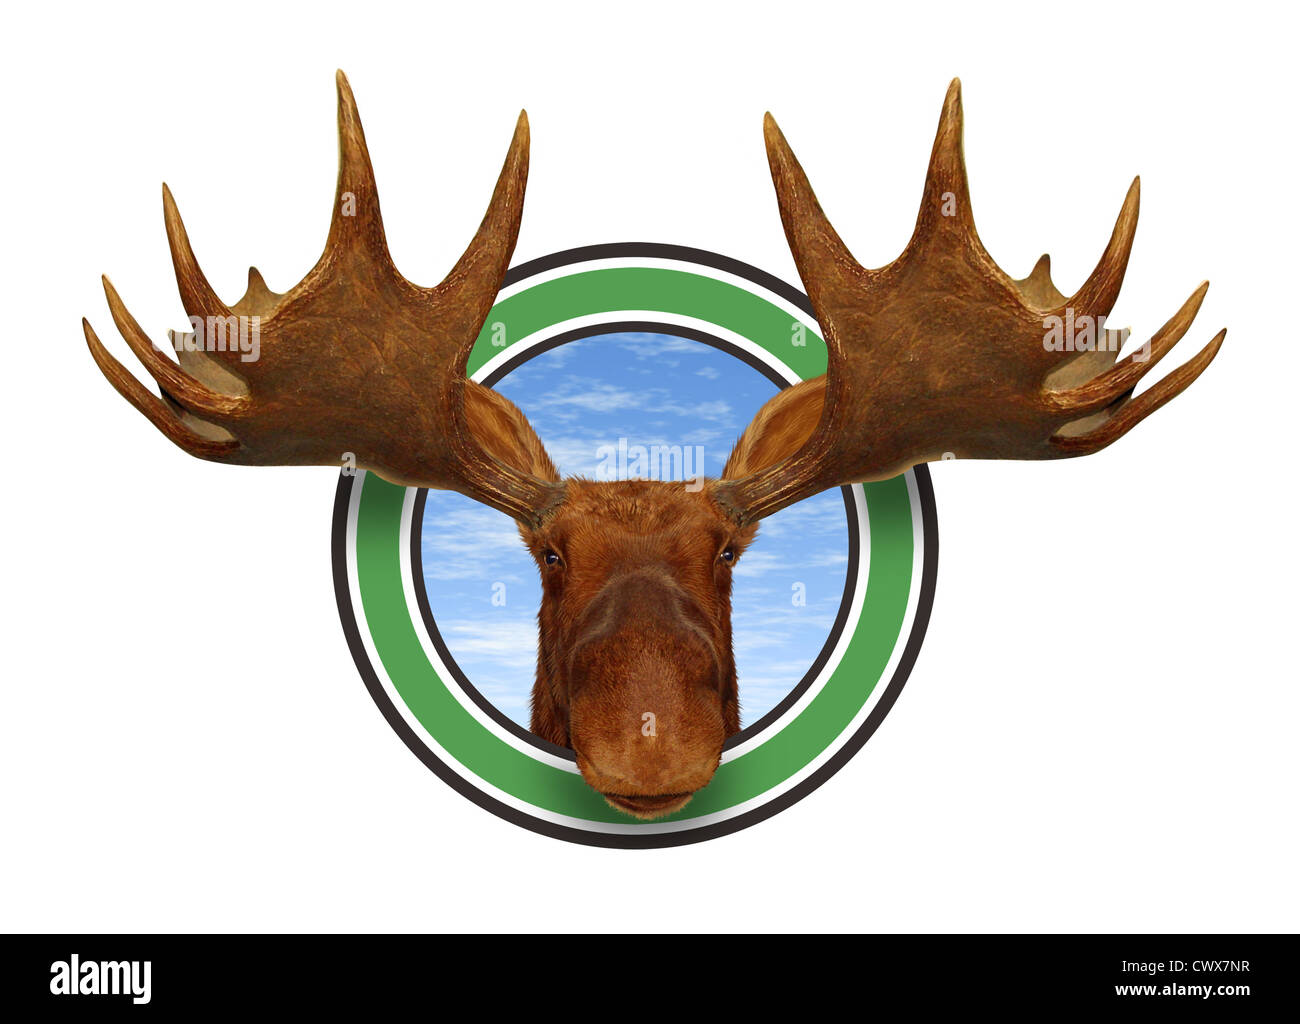 Moose head front view of antlers forest icon isolated on white background representing northern fauna from the wildlife of the Canadian and American north mountains for responsible hunting and natural preservation. Stock Photo